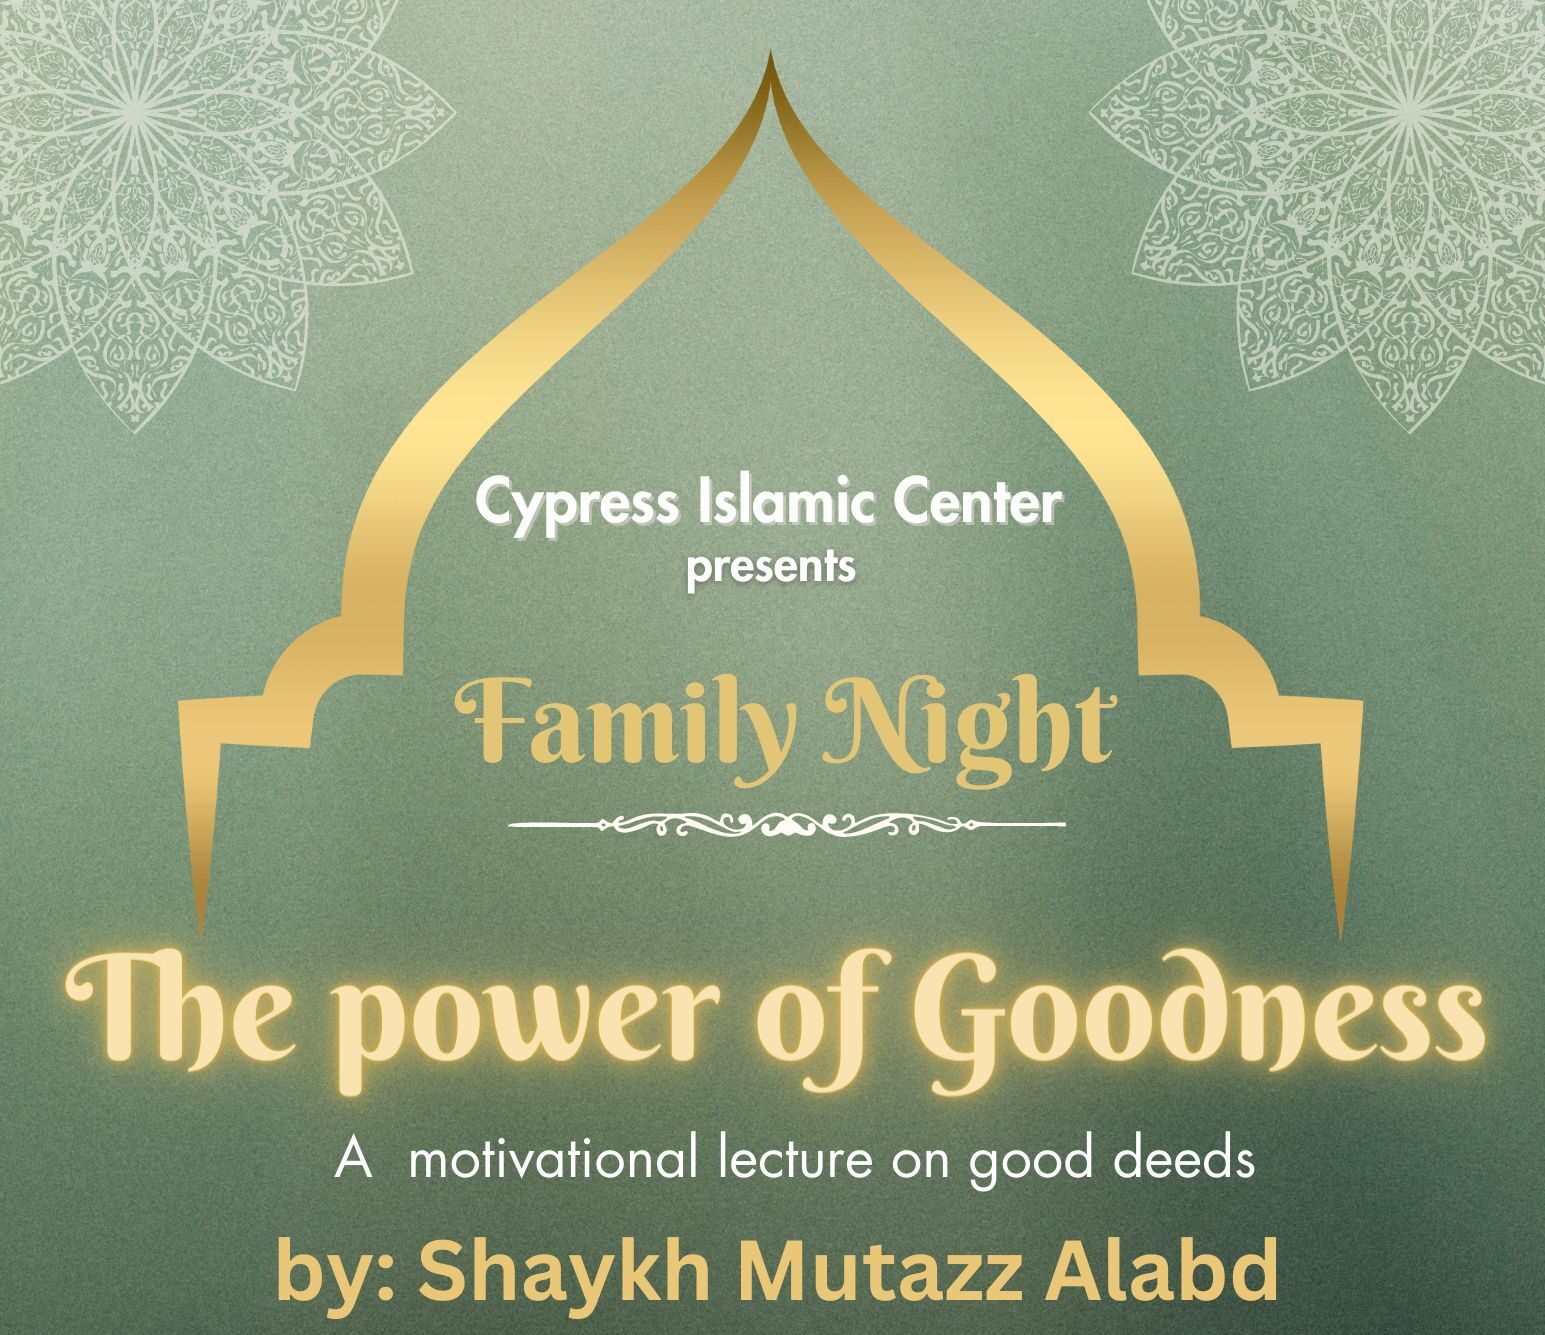 CIC Family Night - The power of goodness